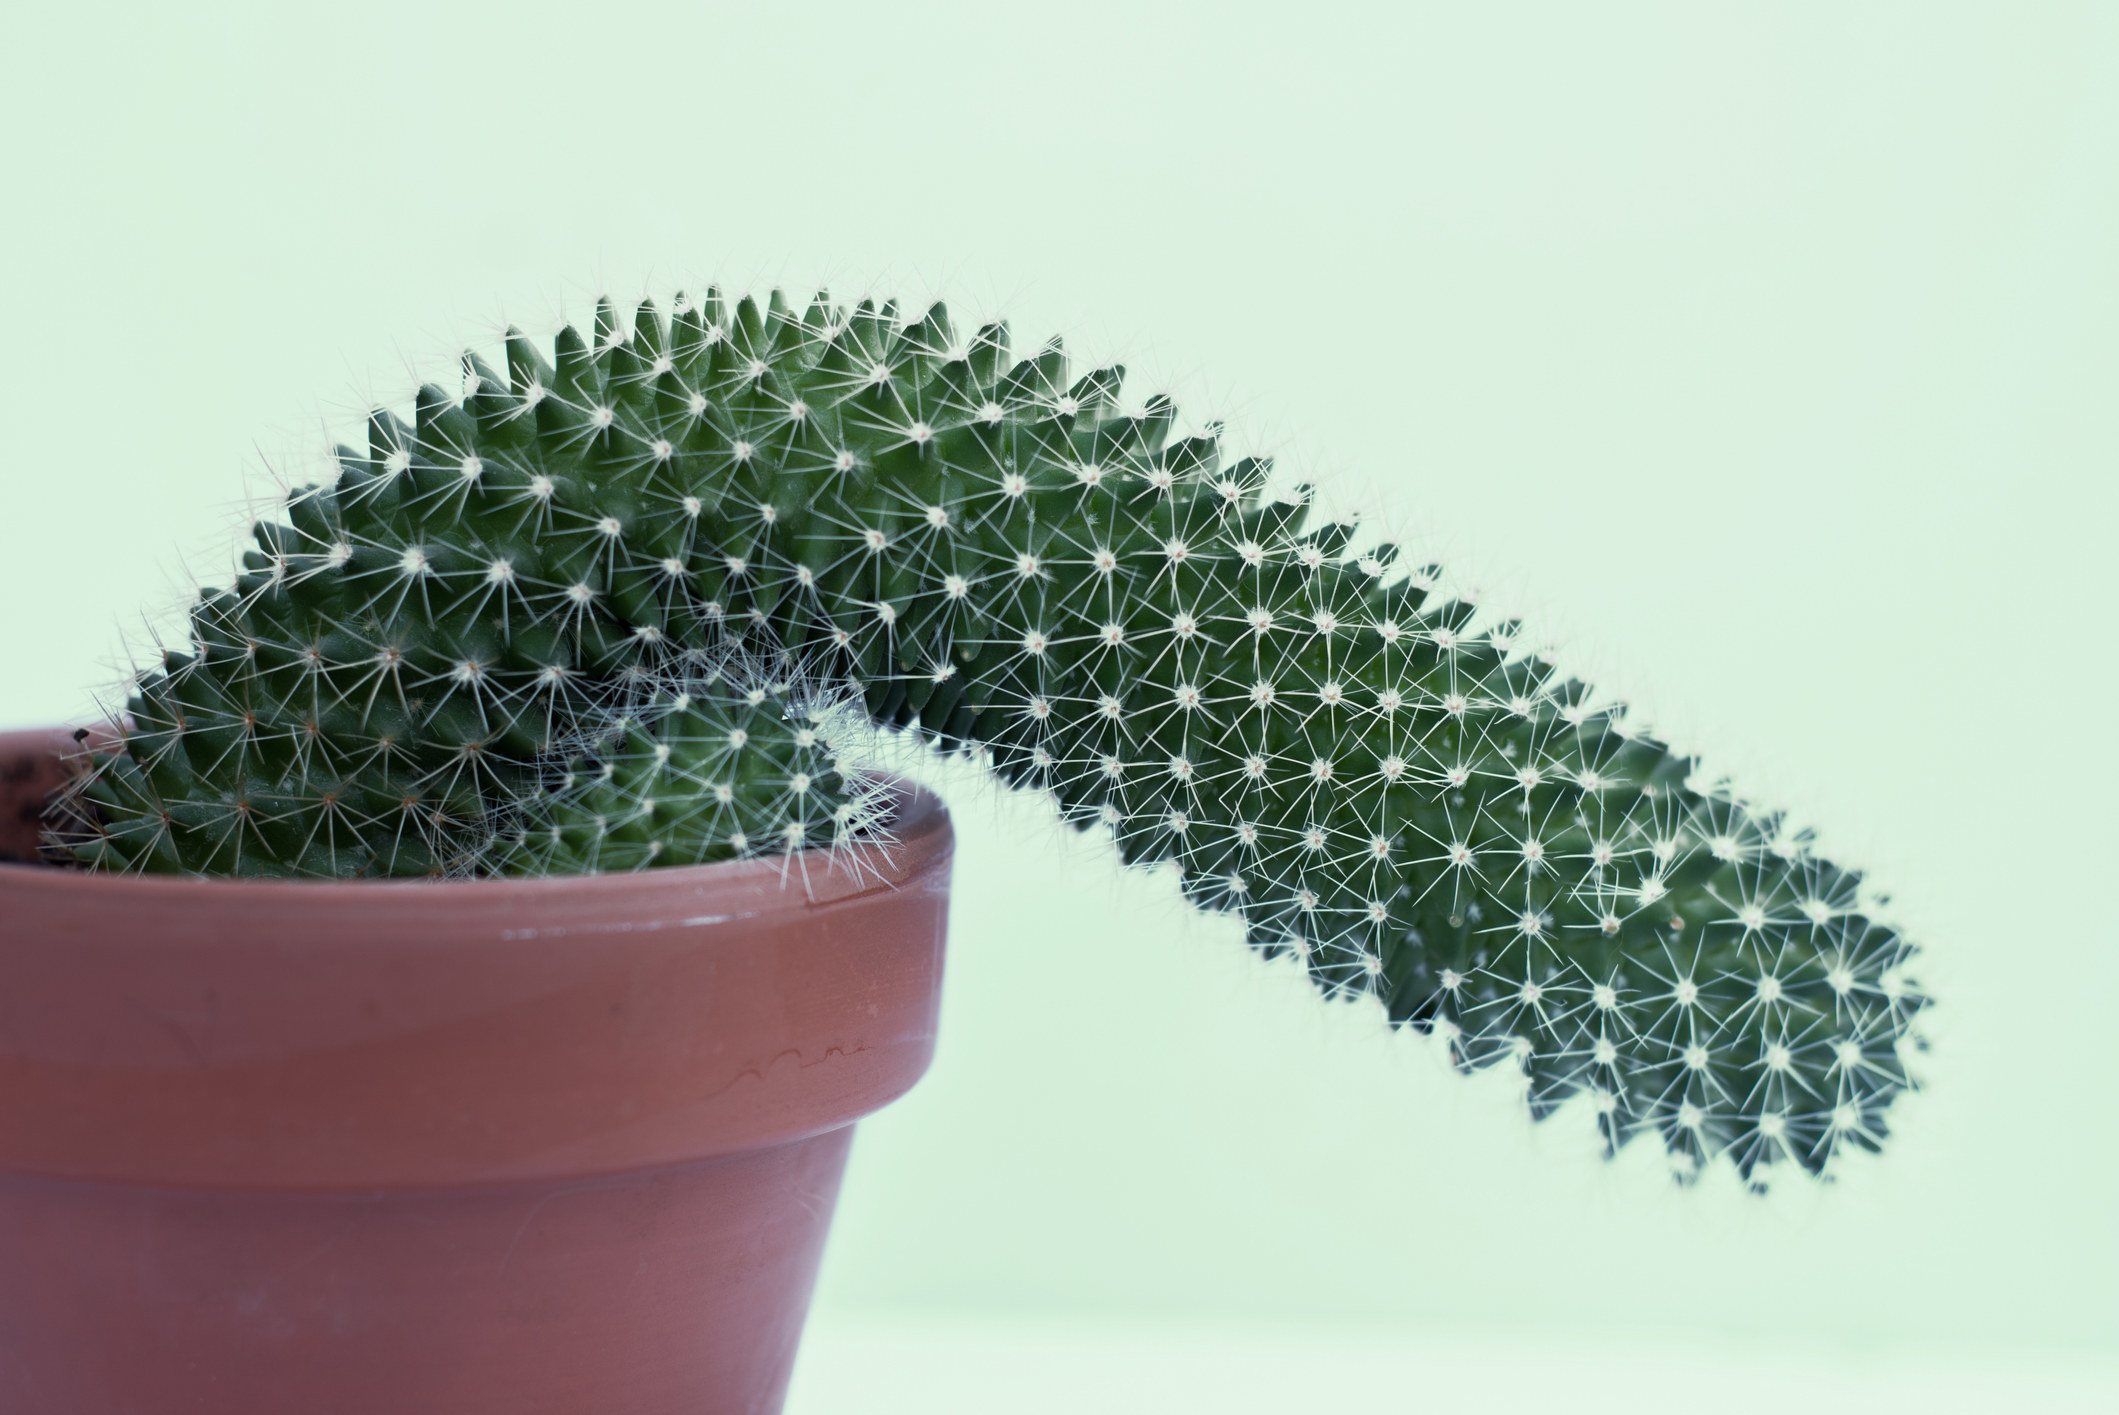 A stock image of a cacti bent over, struggling to stand upright